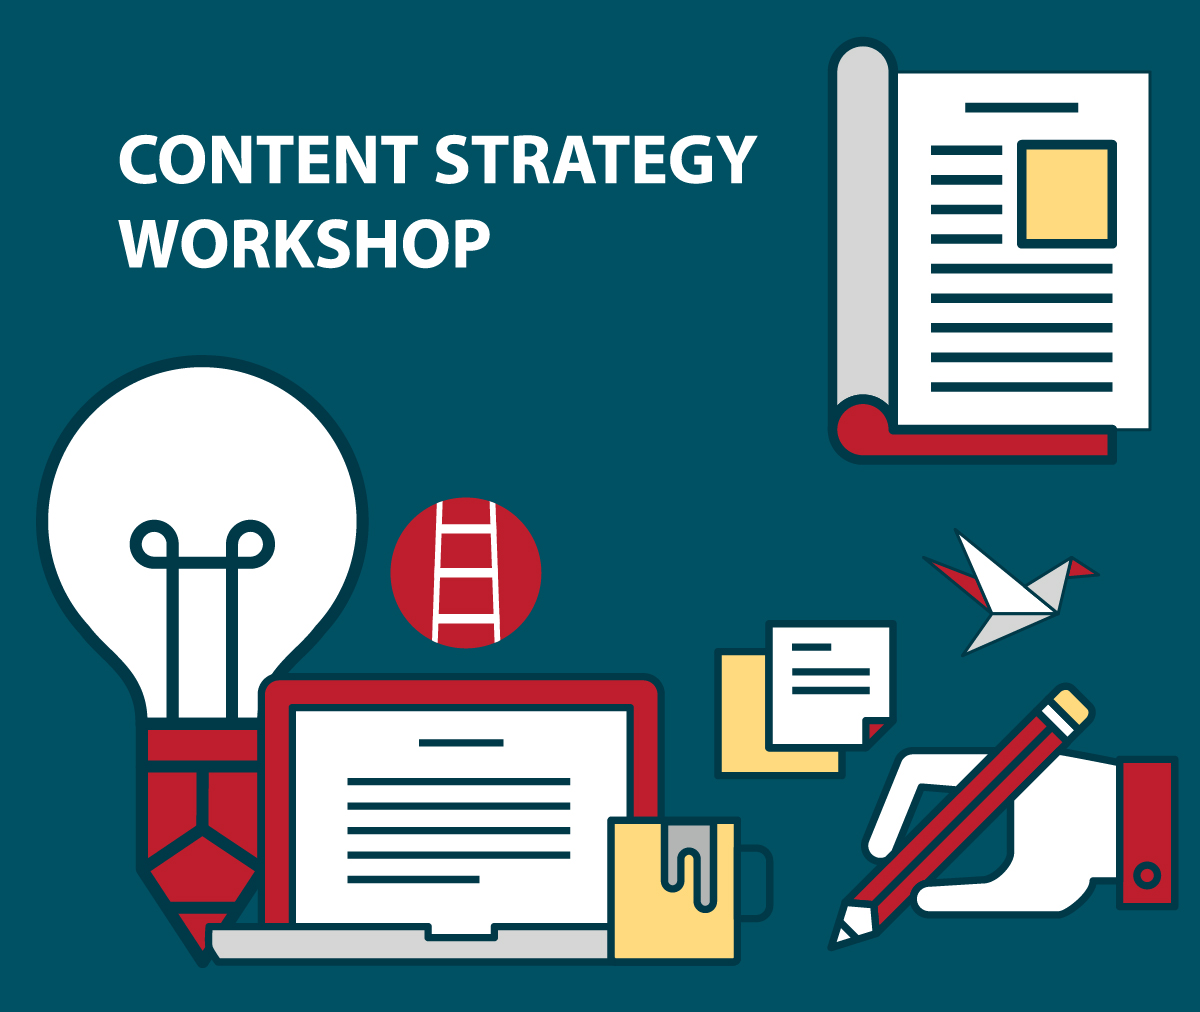 What is a marketing strategy? Hold a workshop